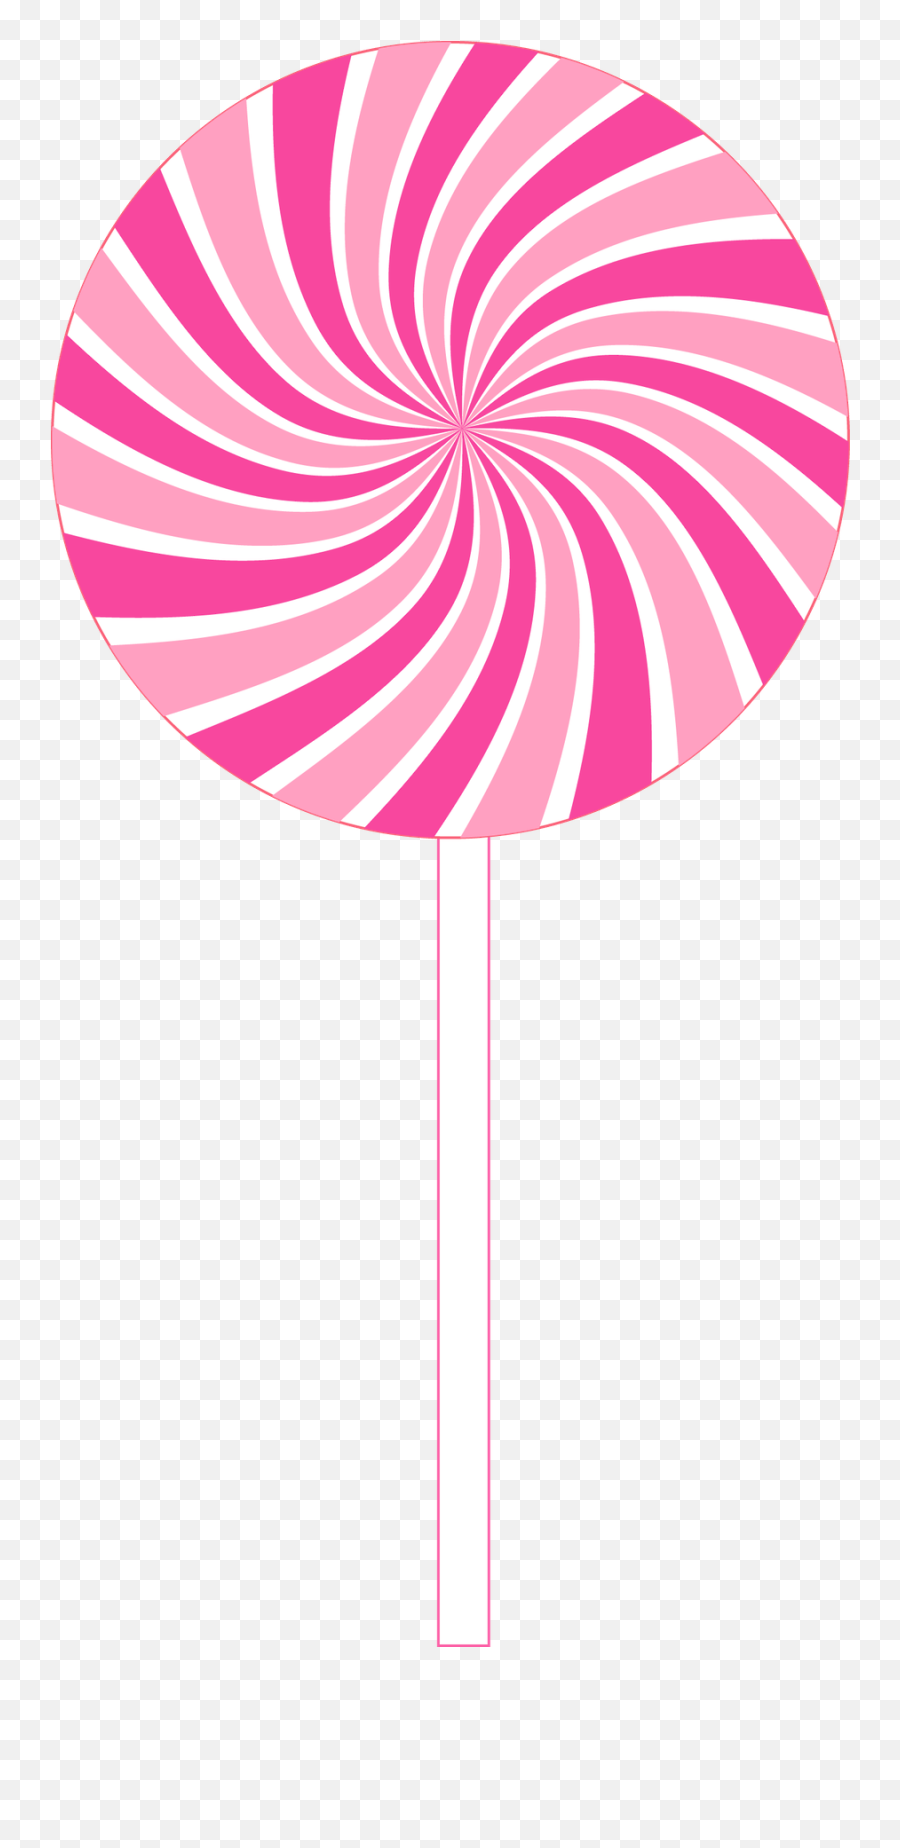 Library Of Pink And Black Candy Apple Banner Png Files - Transparent Willy Wonka Candy Emoji,Candy Apple Emoji